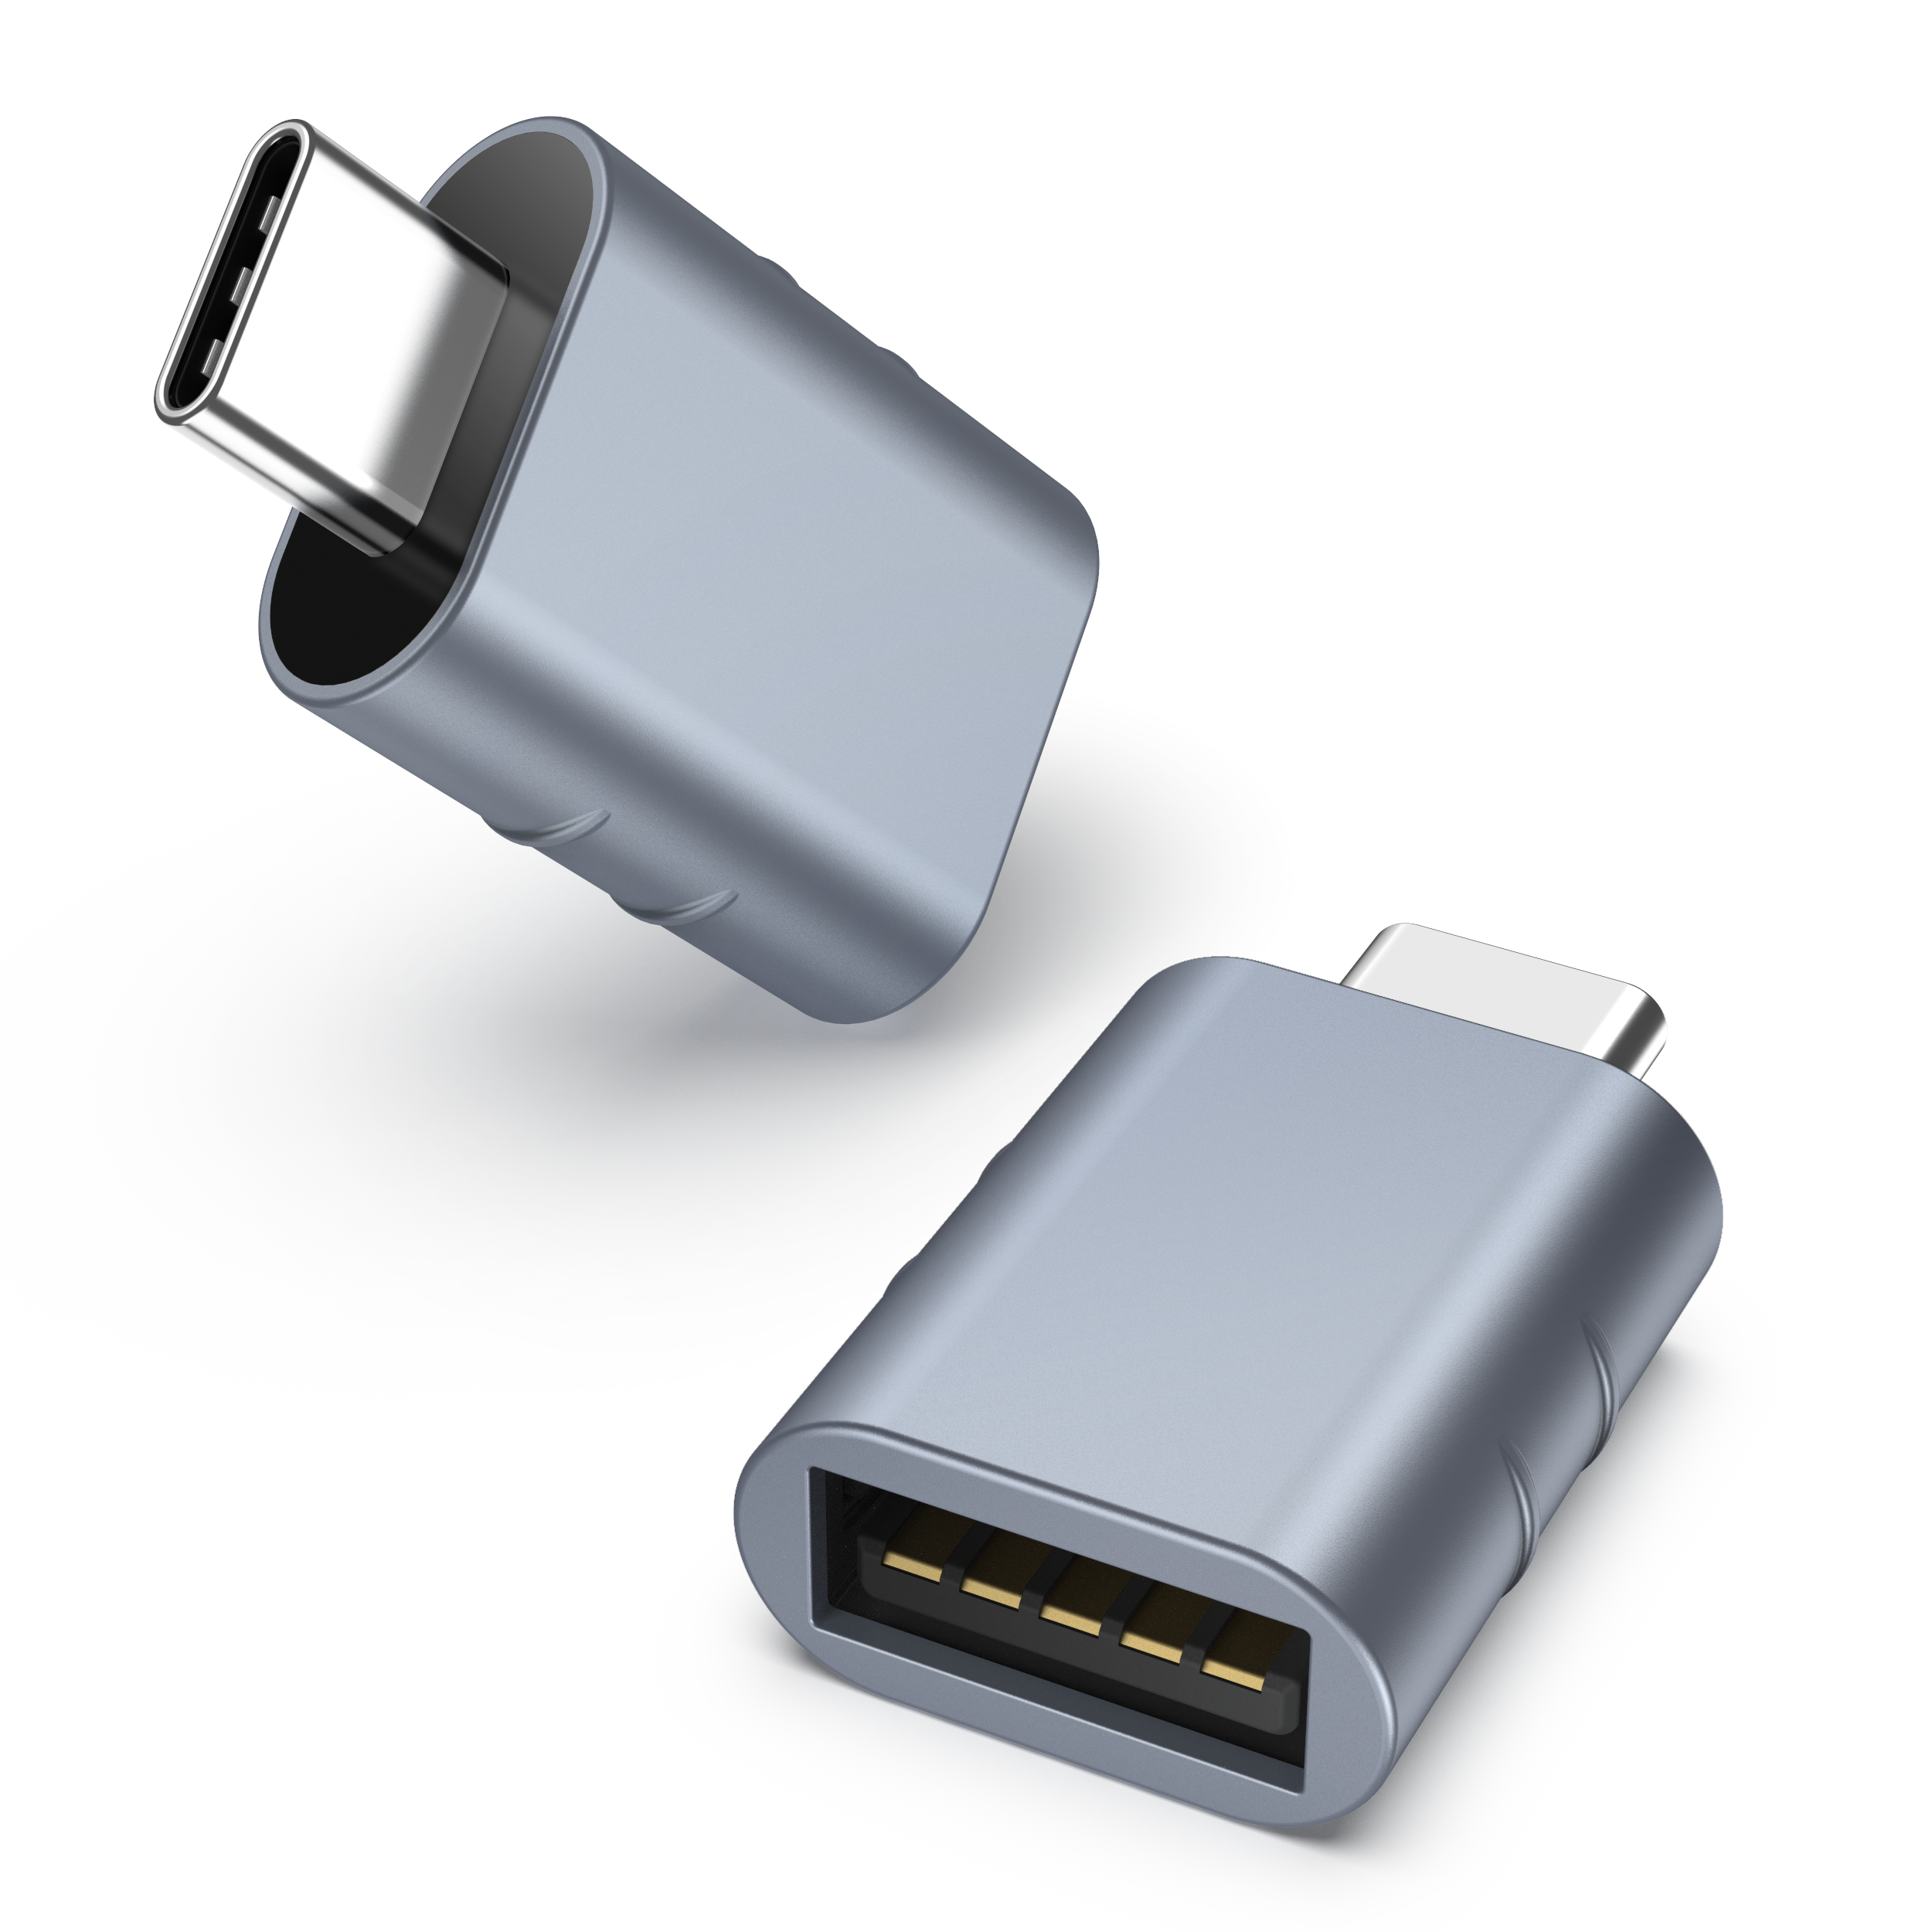 Buy USB C to USB Adapter 3.0 (2 PACK) Online